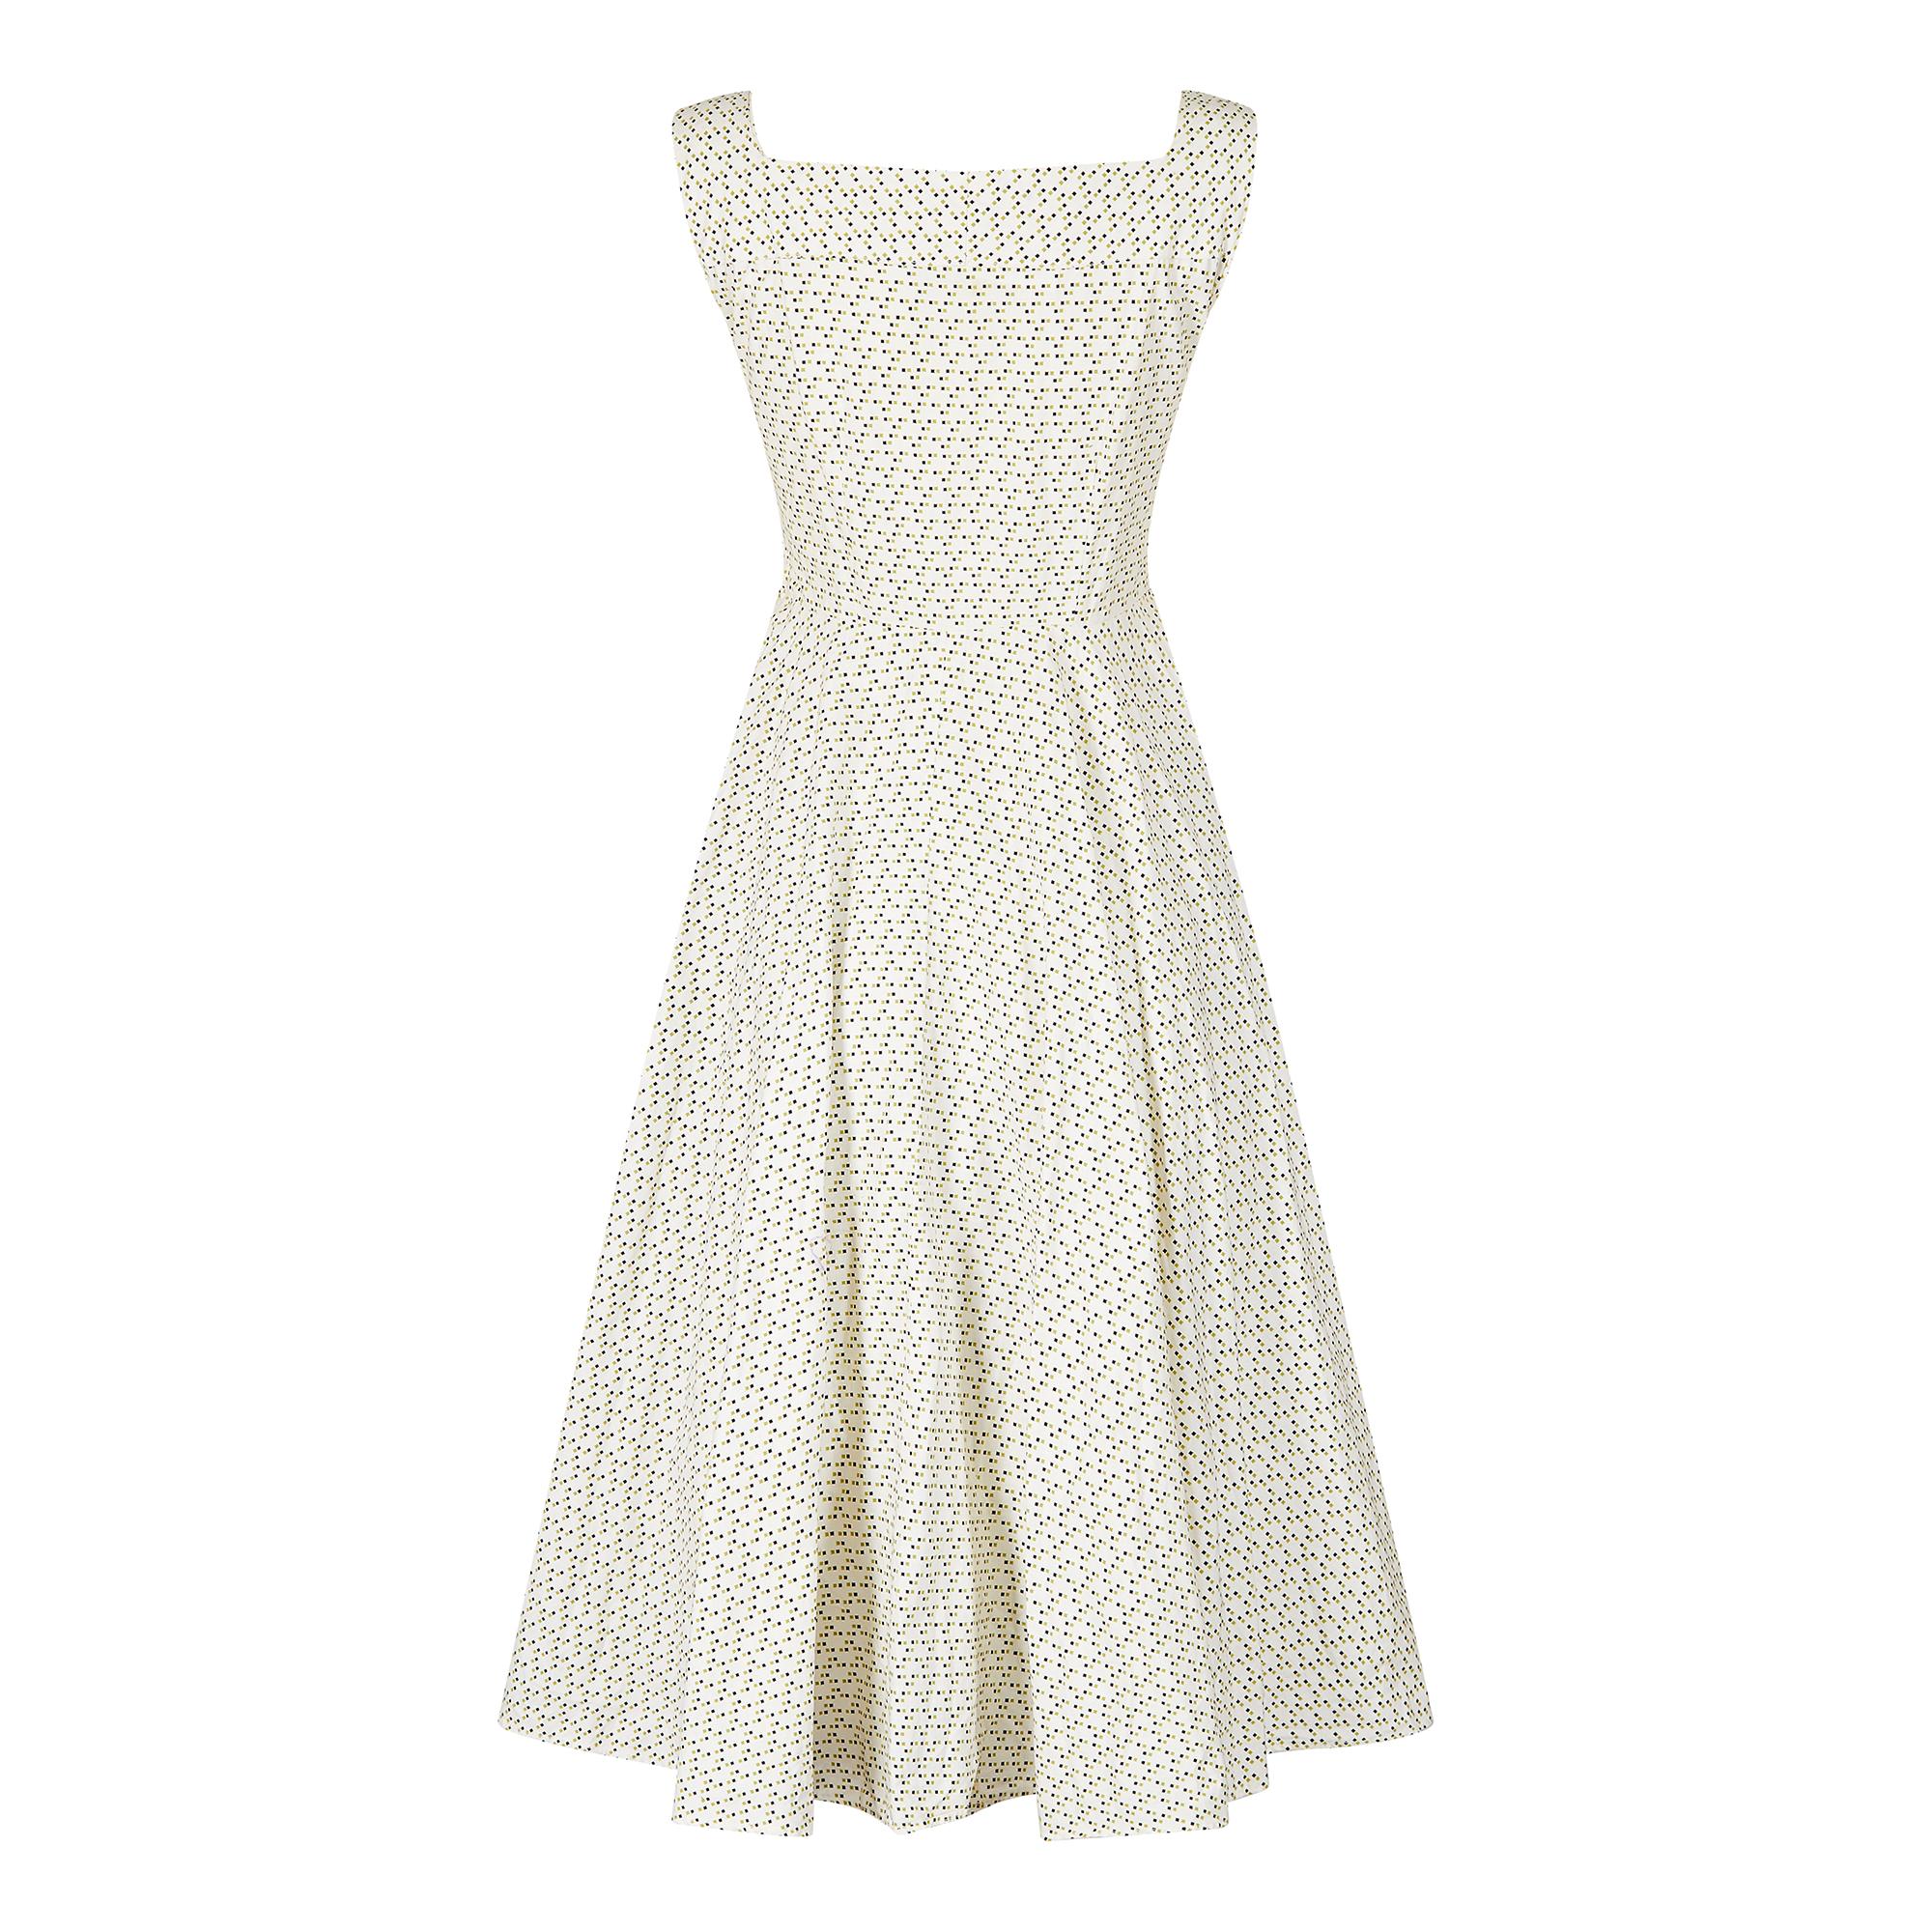 We really love the simplicity of the design of this classic 1950s dress. The skirt is almost a full circle with a stiffed calico petticoat and the pattern reminds us of the space invaders game as the dots look like mini spaceships! The pattern is